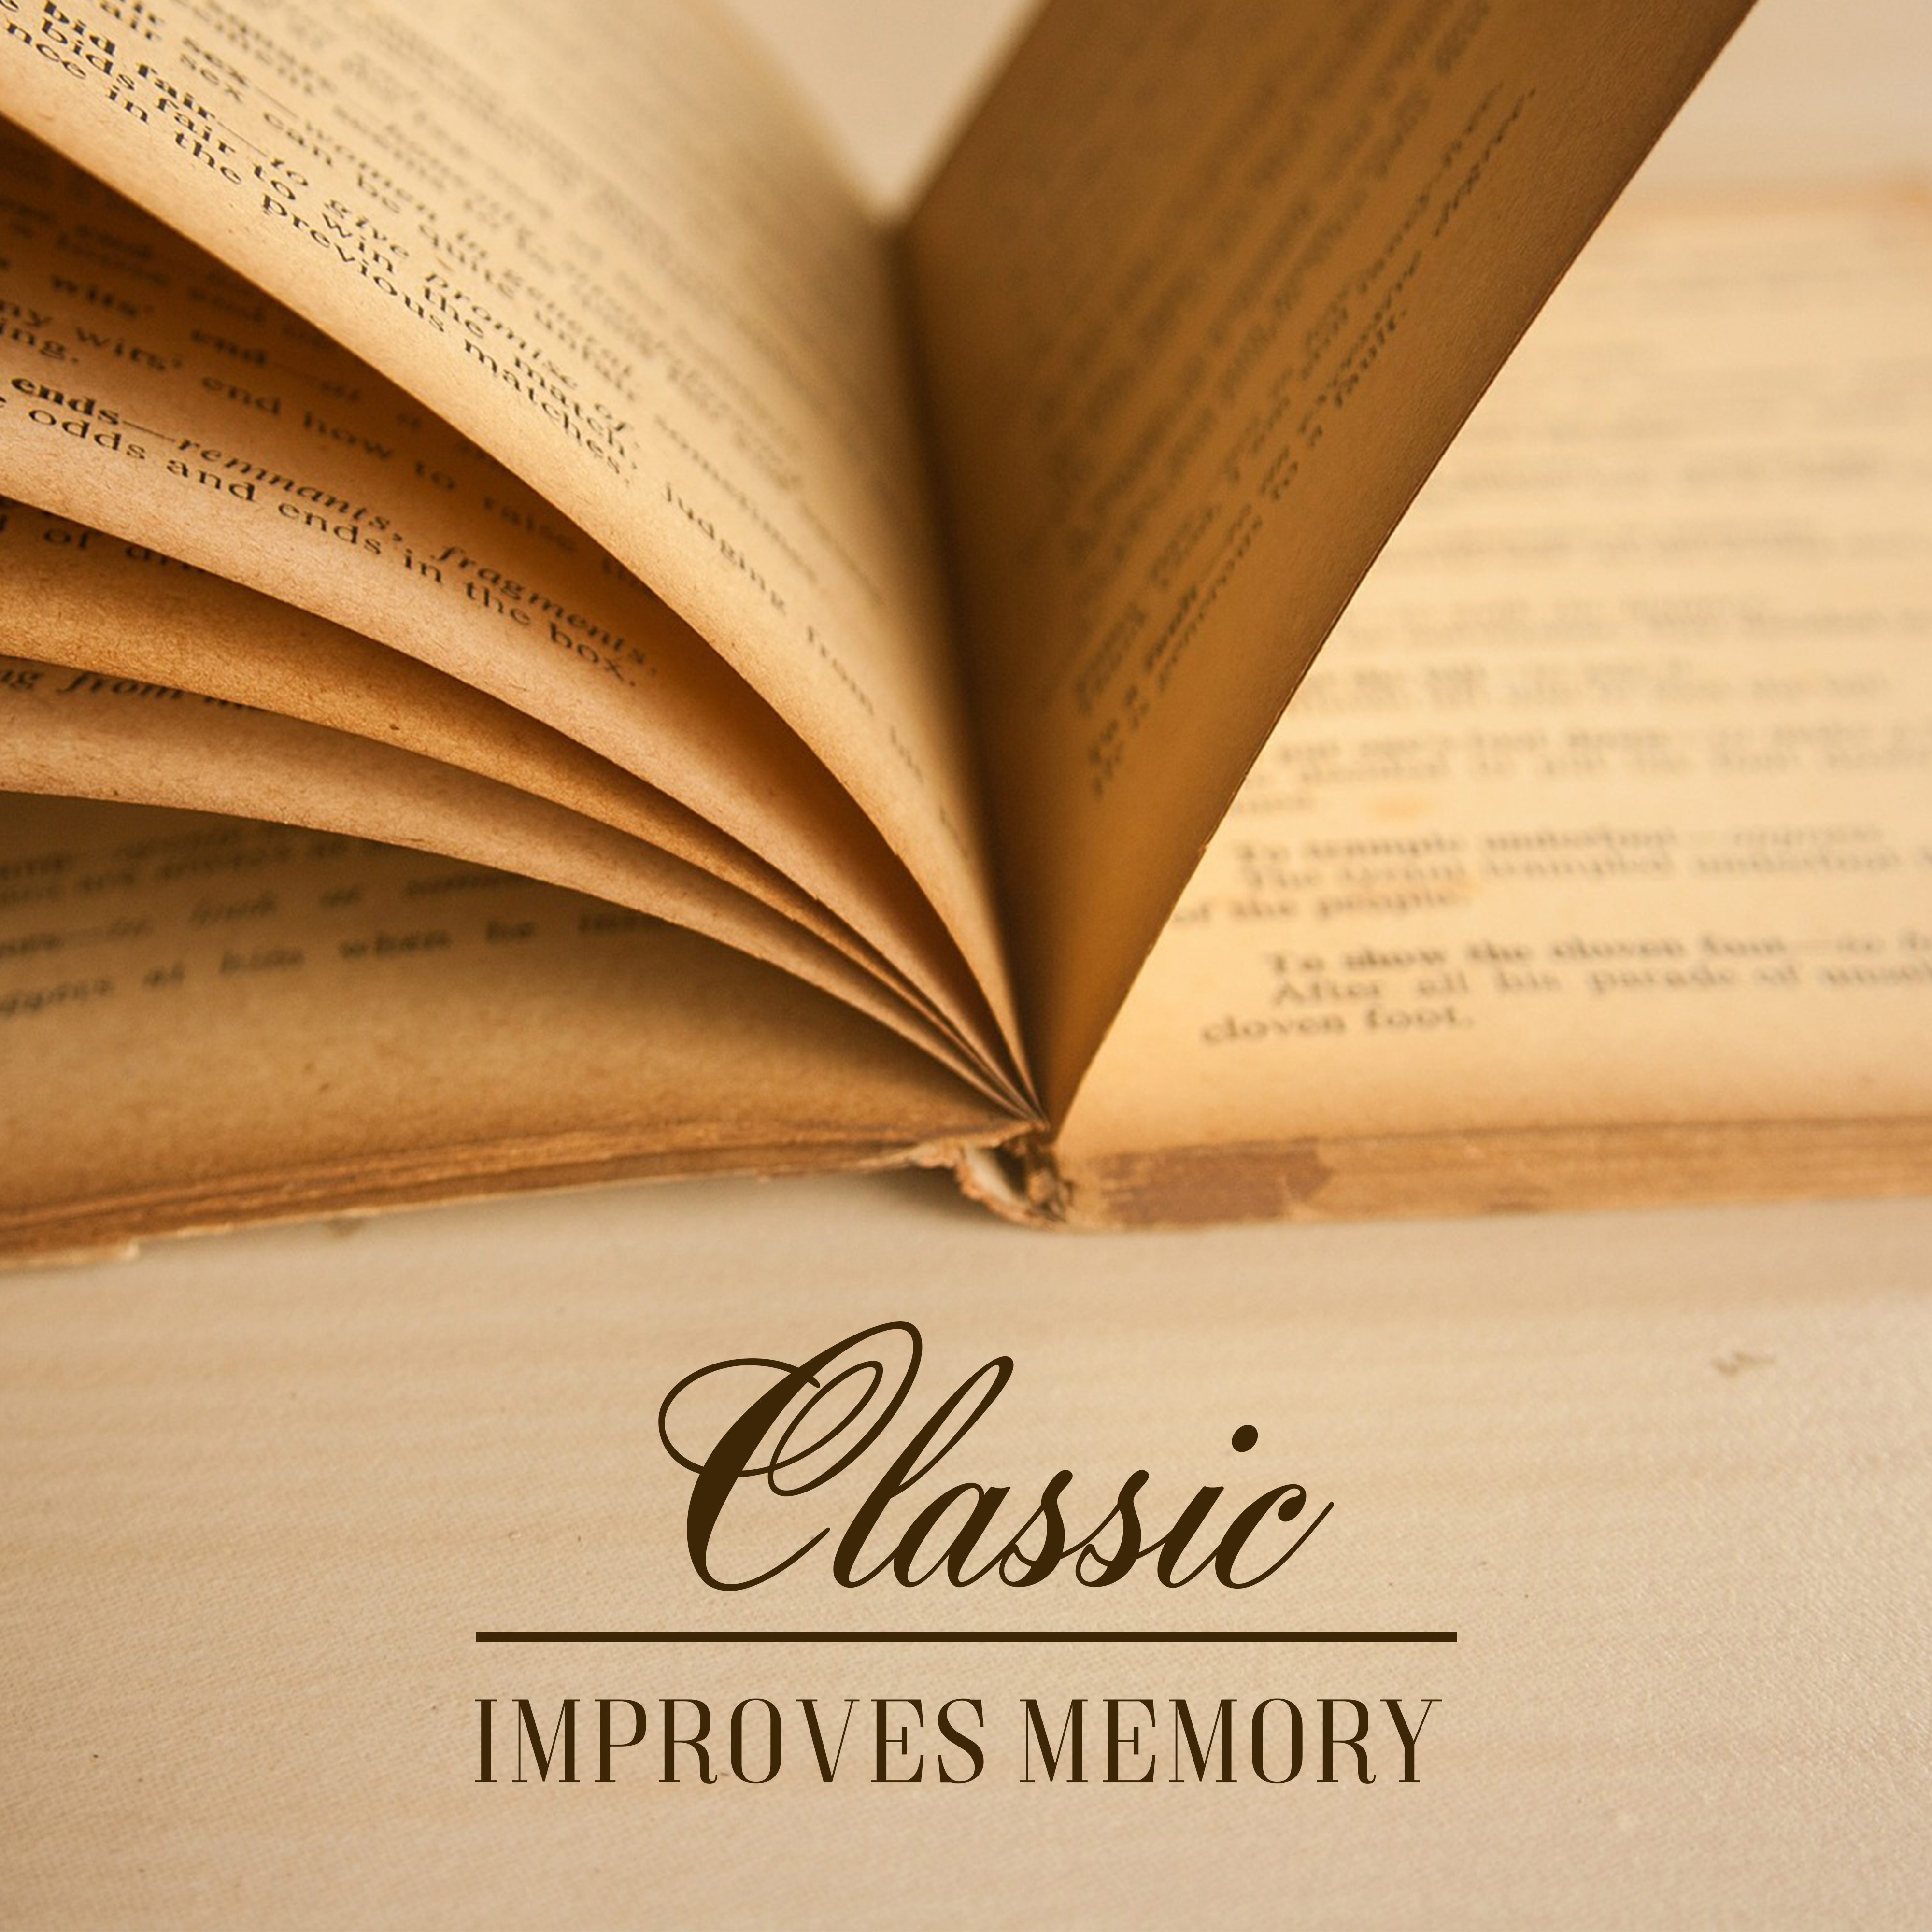 Classic Improves Memory  Best Studying Music, Deep Focus, Relaxation Sounds, Classical Music, Bach, Mozart